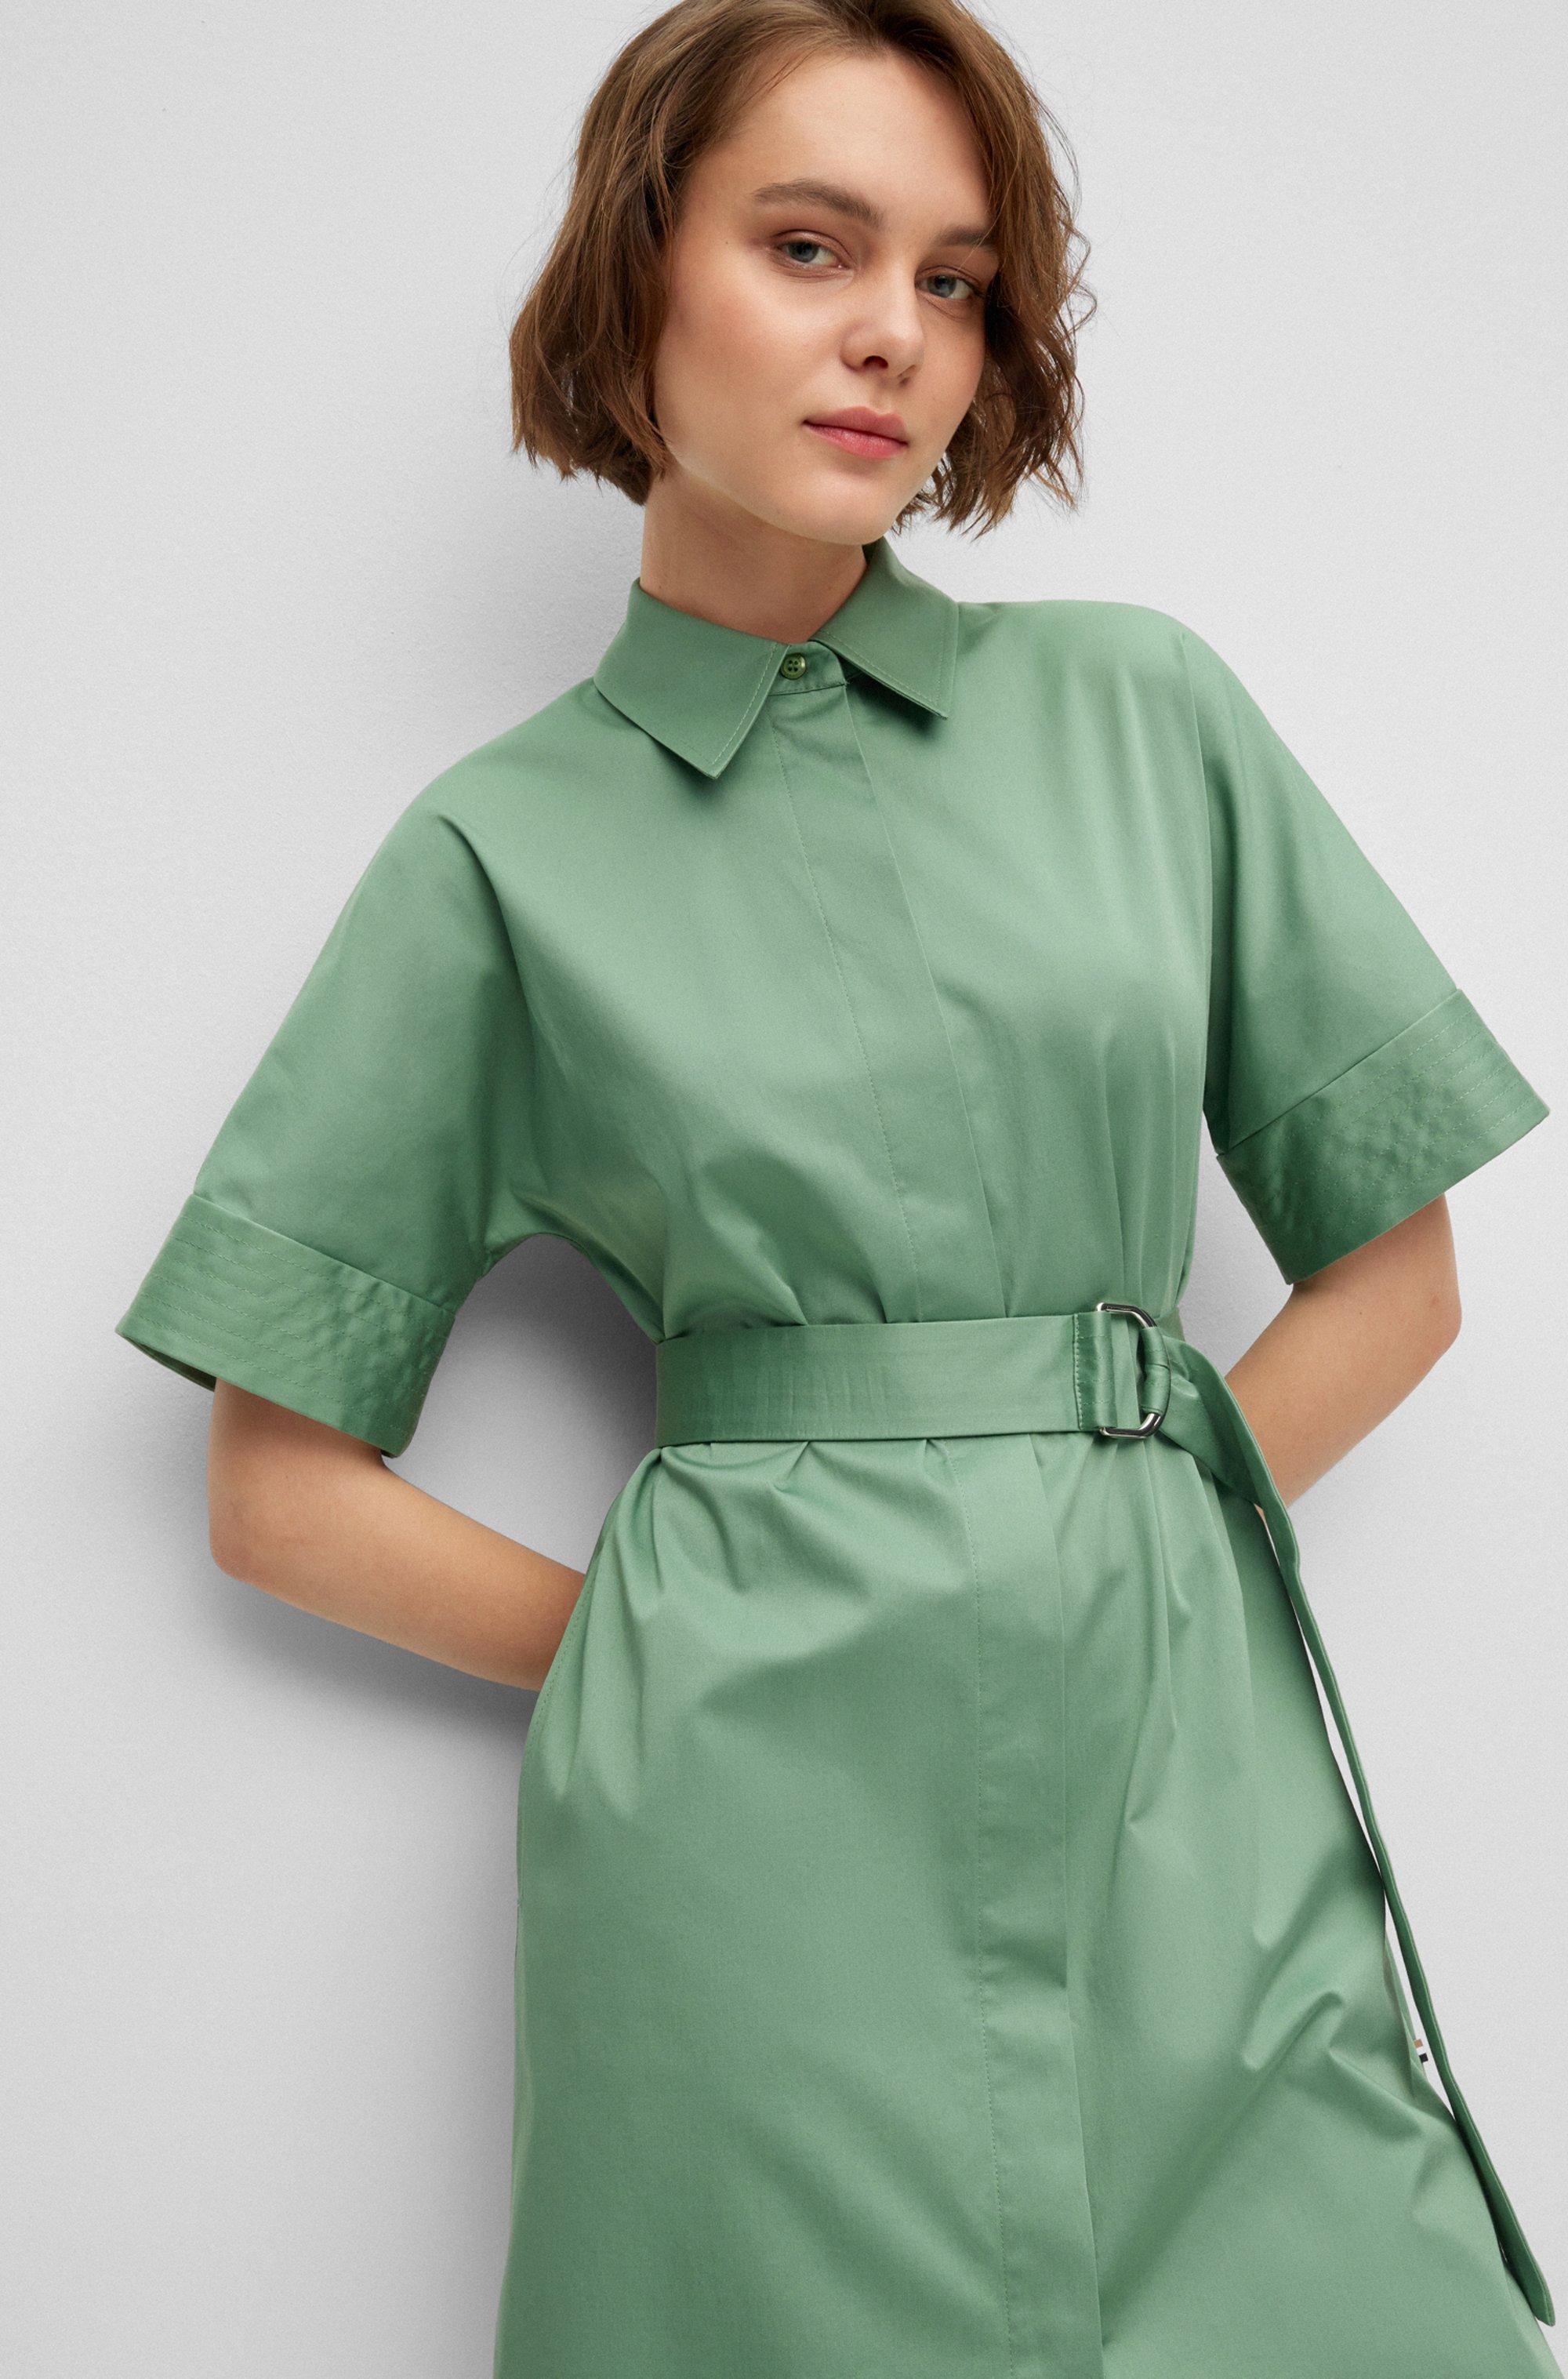 spids Cafe Portal BOSS by HUGO BOSS Slim-fit Stretch-cotton Shirt Dress With Belted Closure  in Green | Lyst